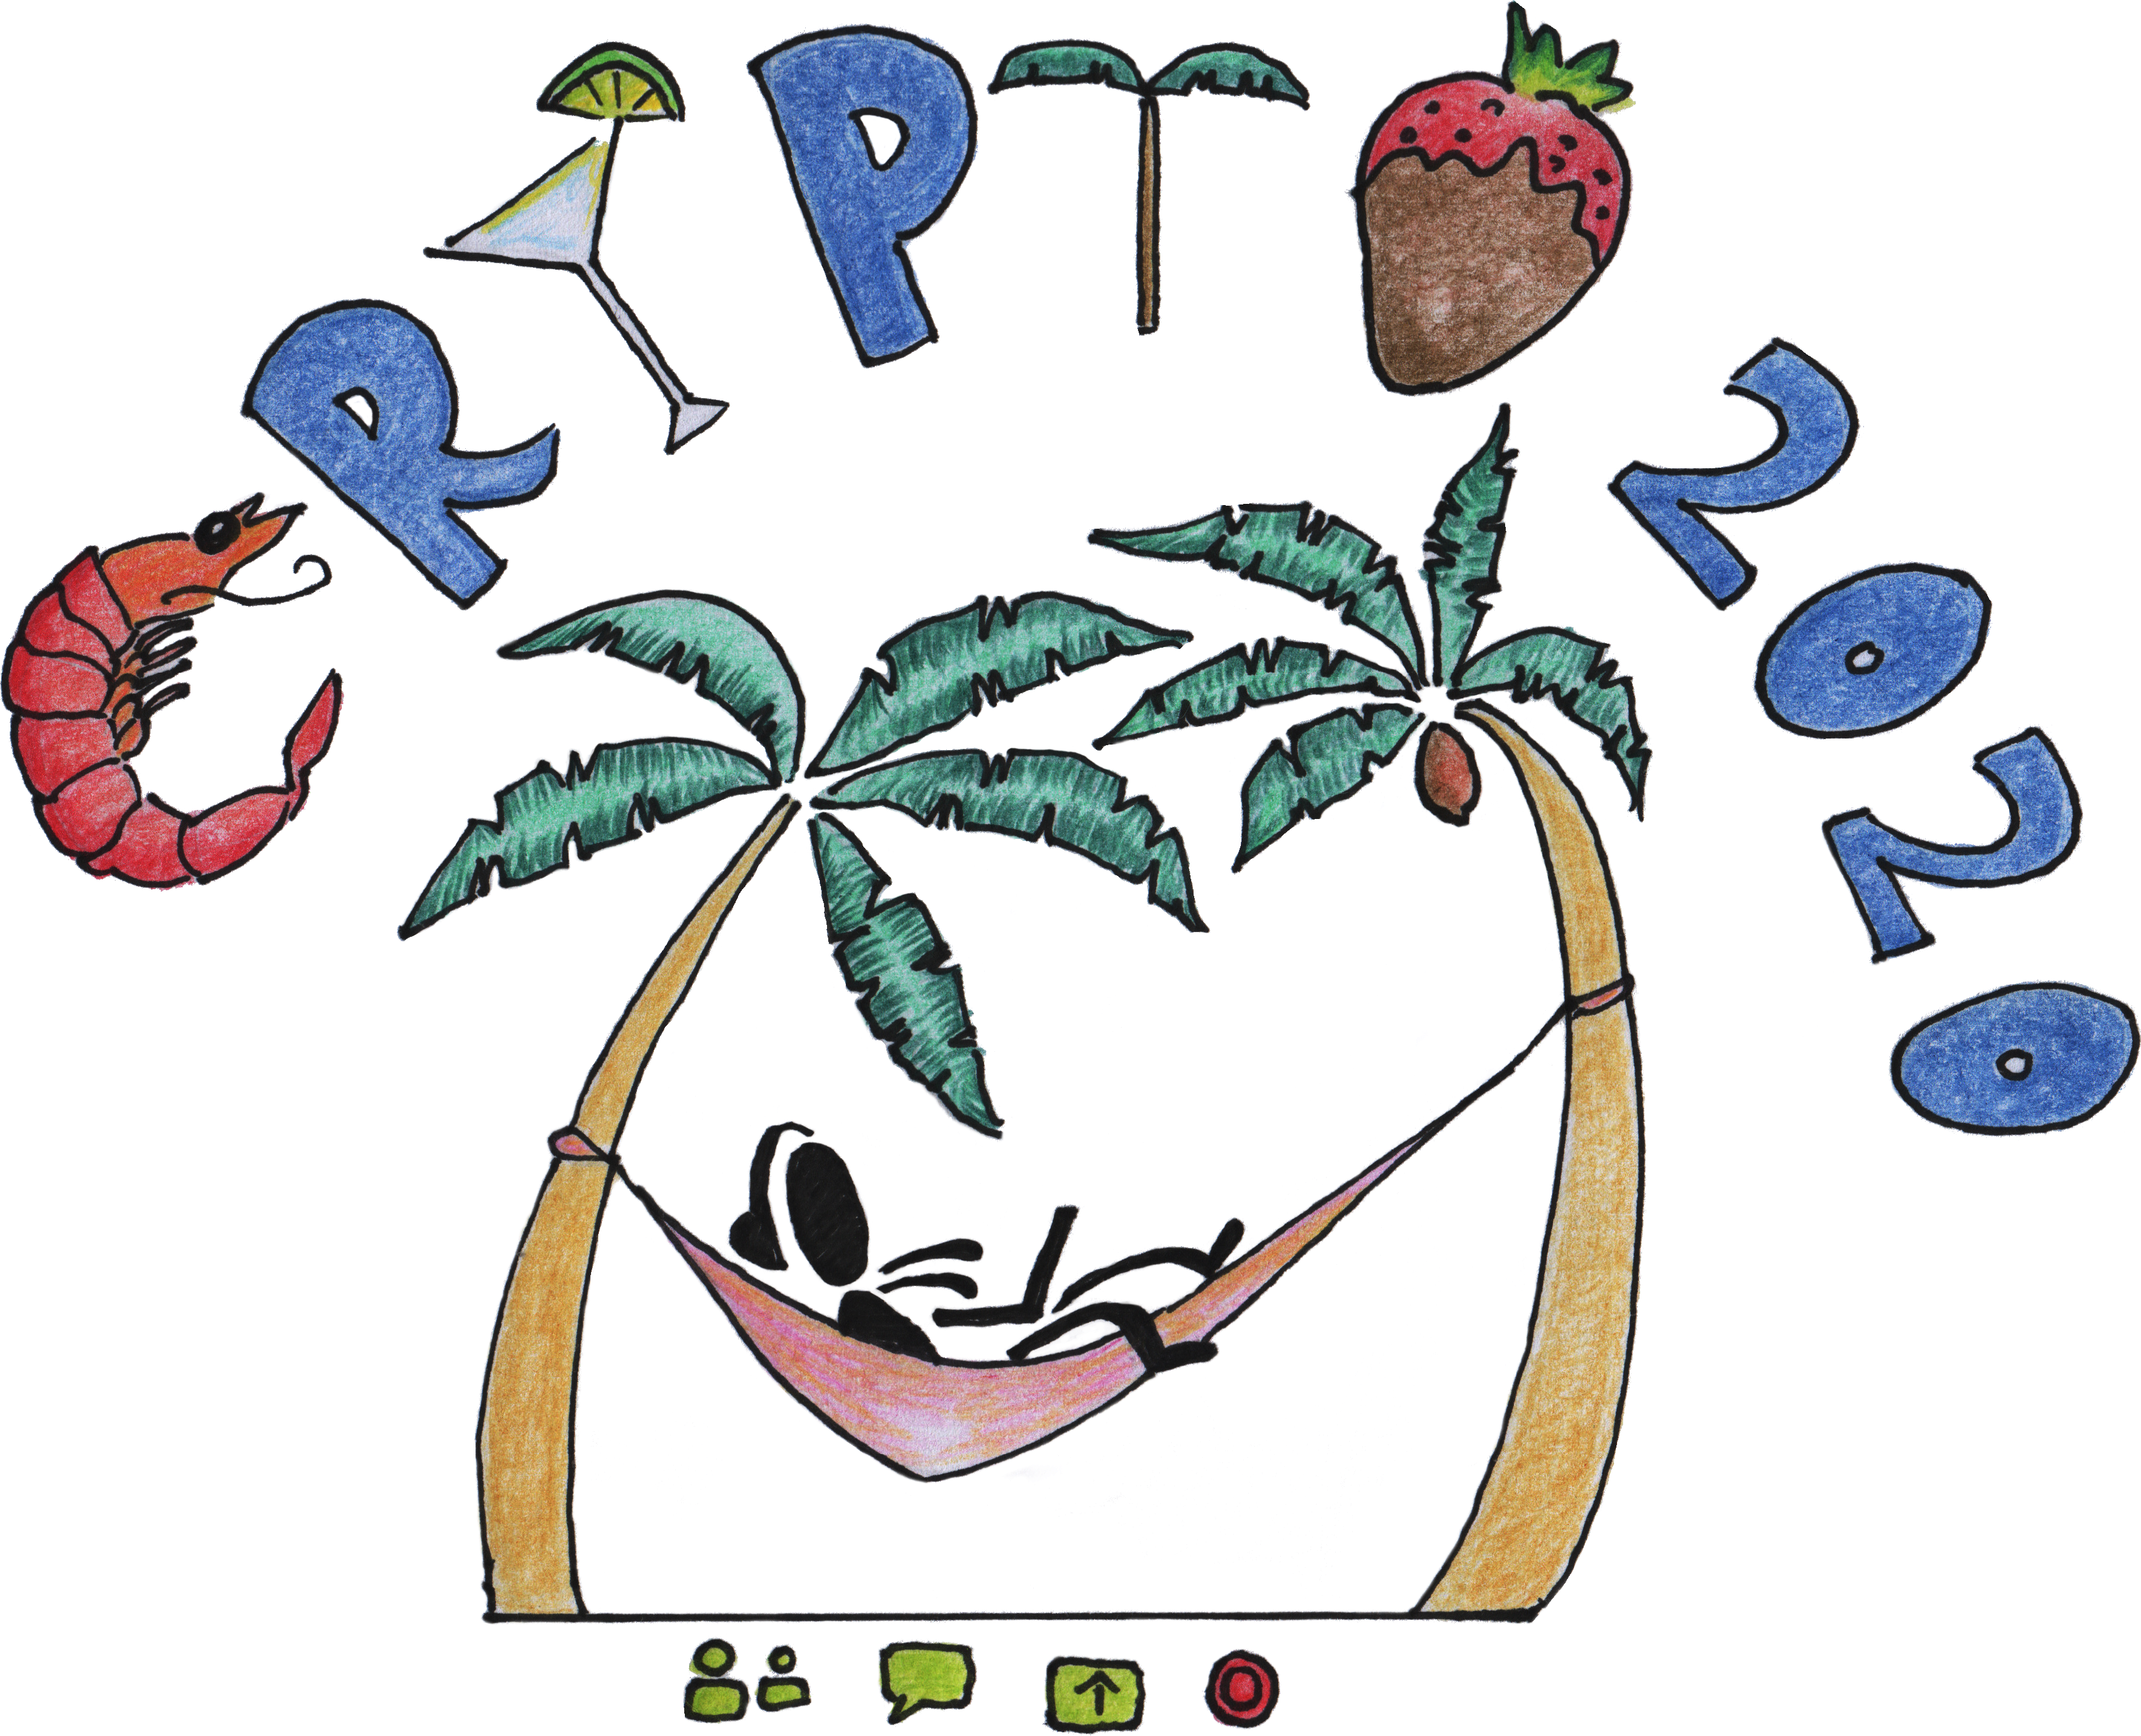 a stick figure laying on a hammock strung between two palm trees. the words crypto 2020 are above, with the c replaced by a shrimp and the o replaced with a chocolate dipped strawberry. below the palm trees are the zoom controls